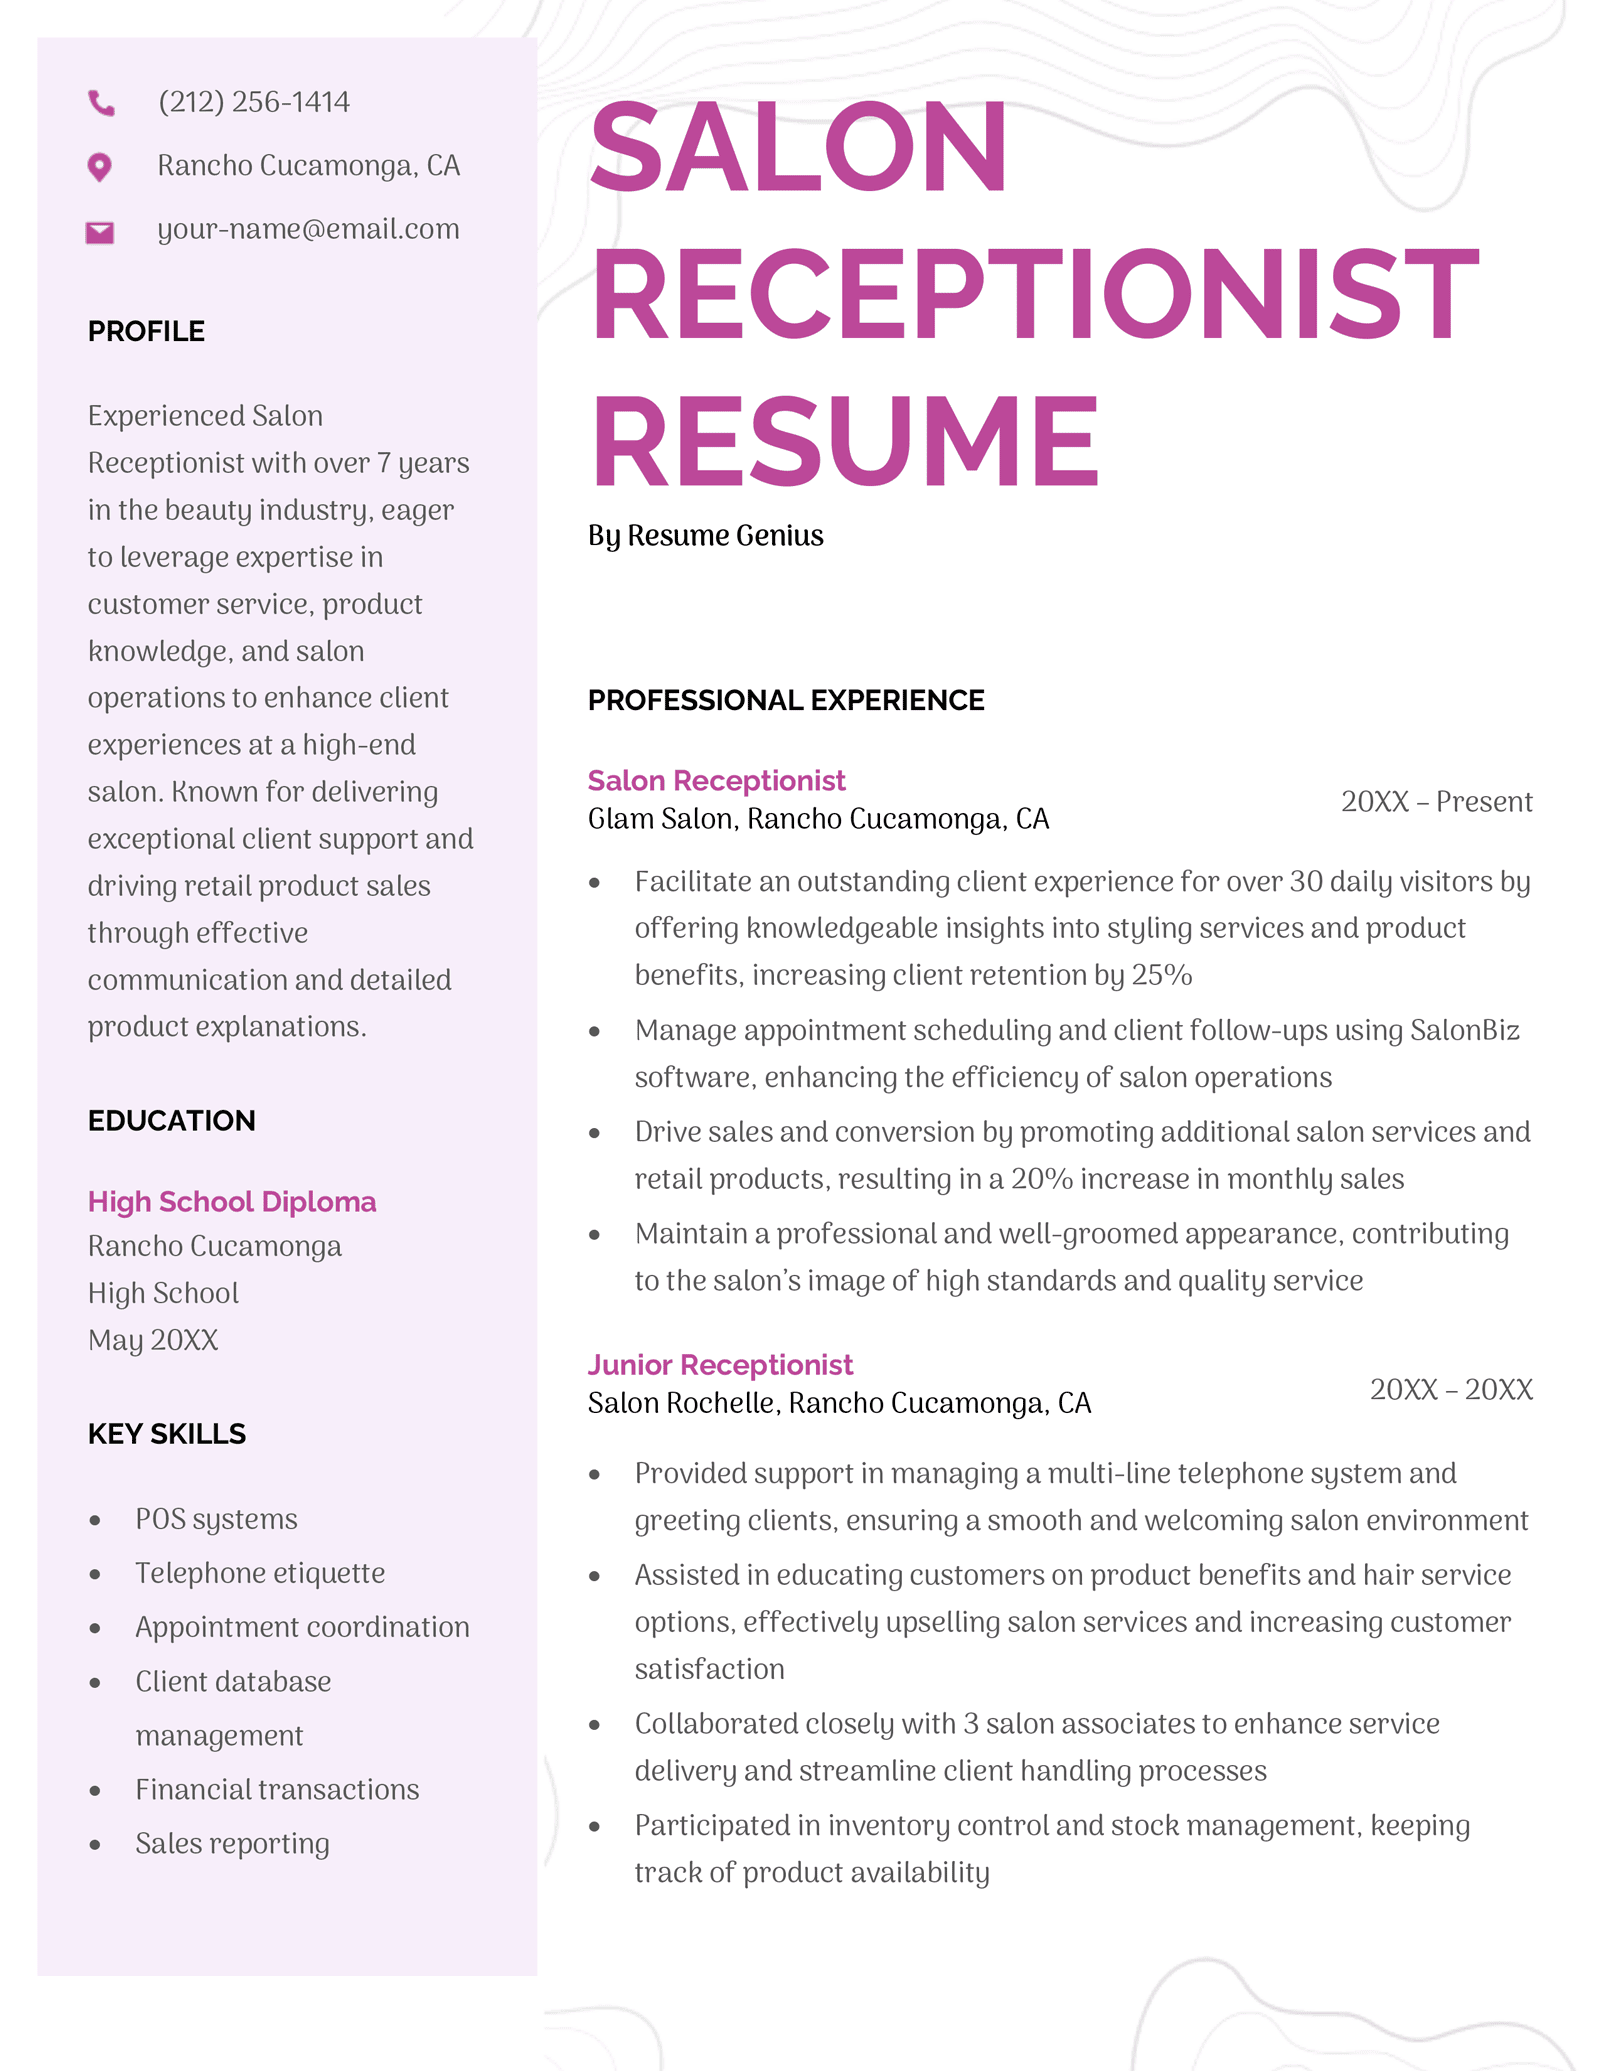 A sample receptionist resume example that uses a pastel purple color scheme and a two-column layout.